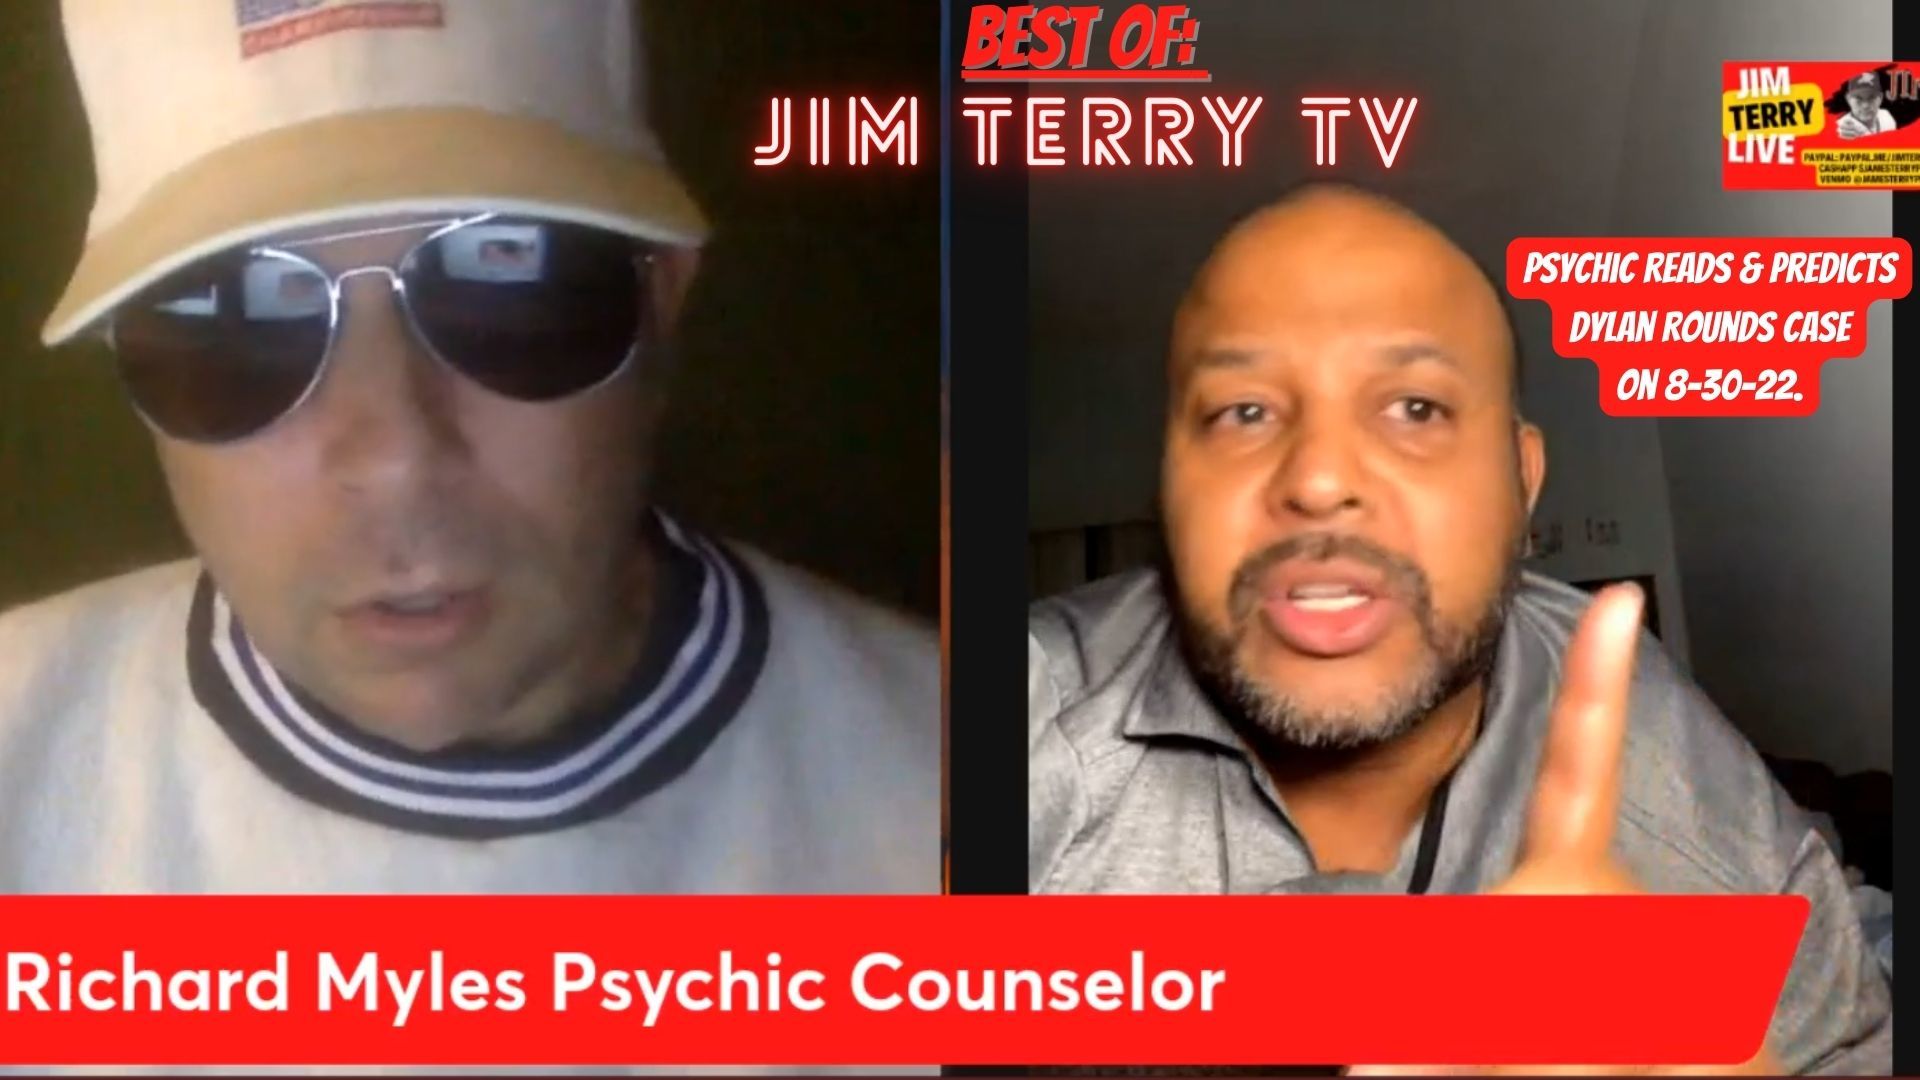 Best of JTTV: Psychic Reads & Predicts Dylan Rounds Case